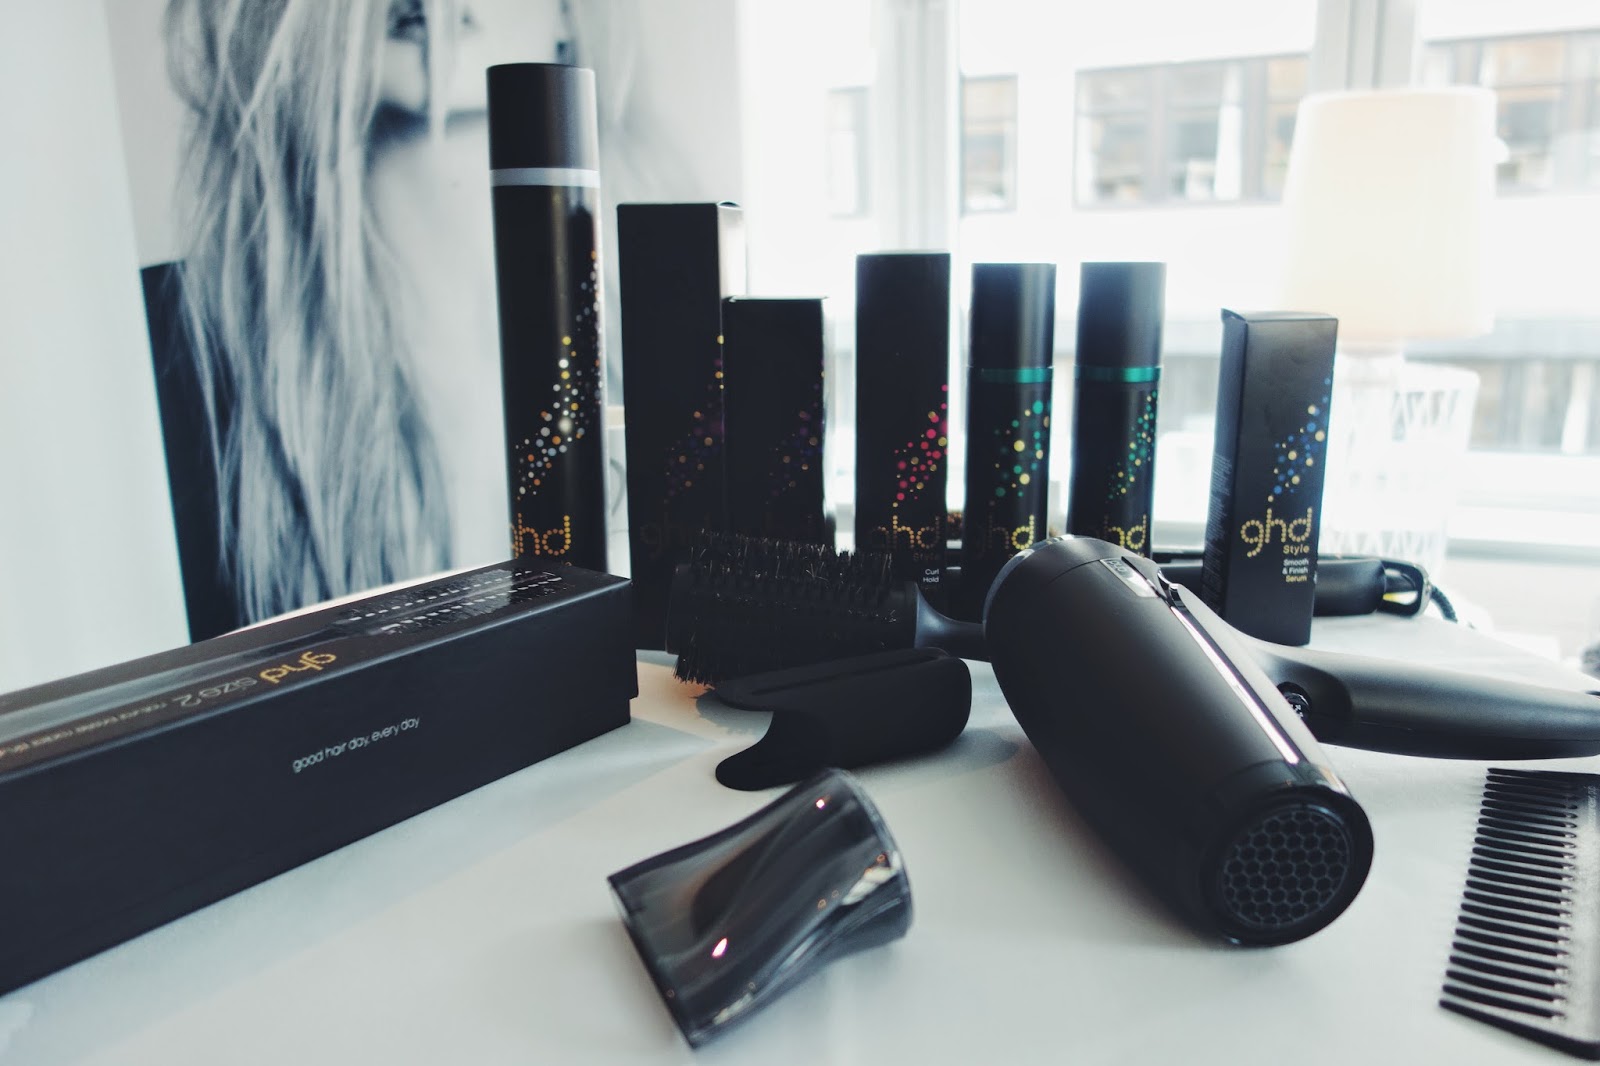 The New ghd aura Is Finally Revealed...